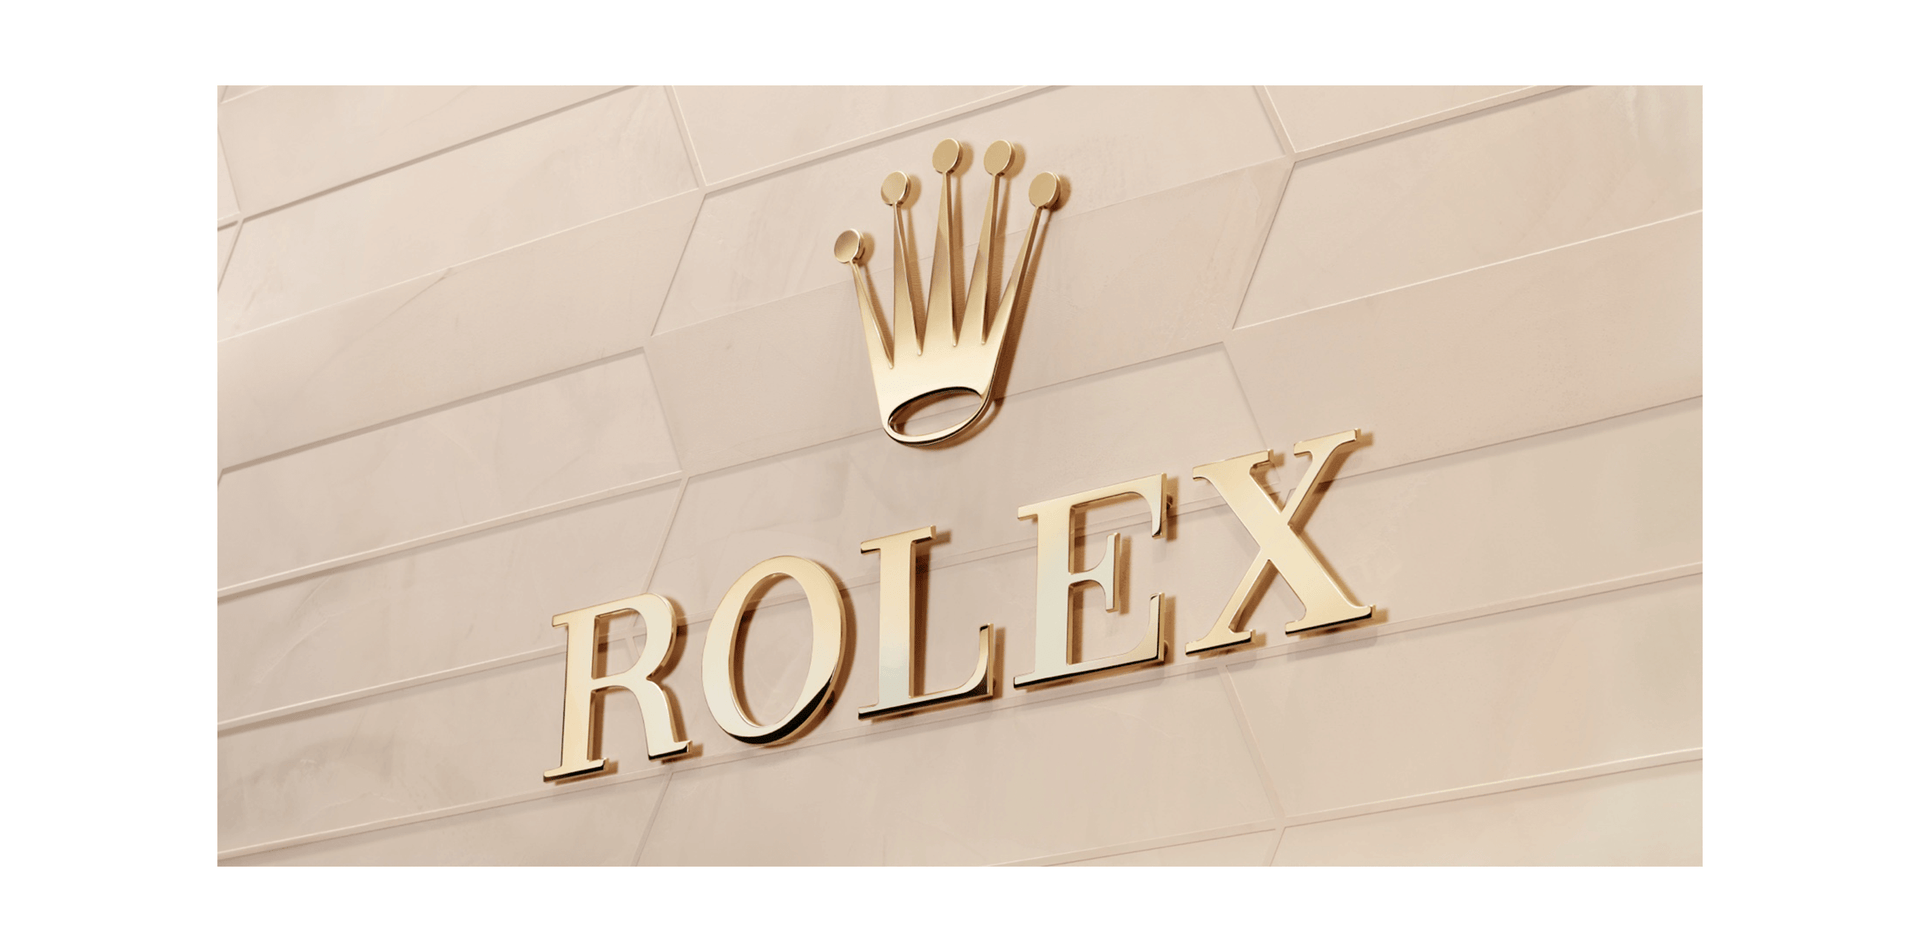 Rolex logo in yellow gold with crown image sitting above block ROLEX text on a wall with beige trapezoid tile